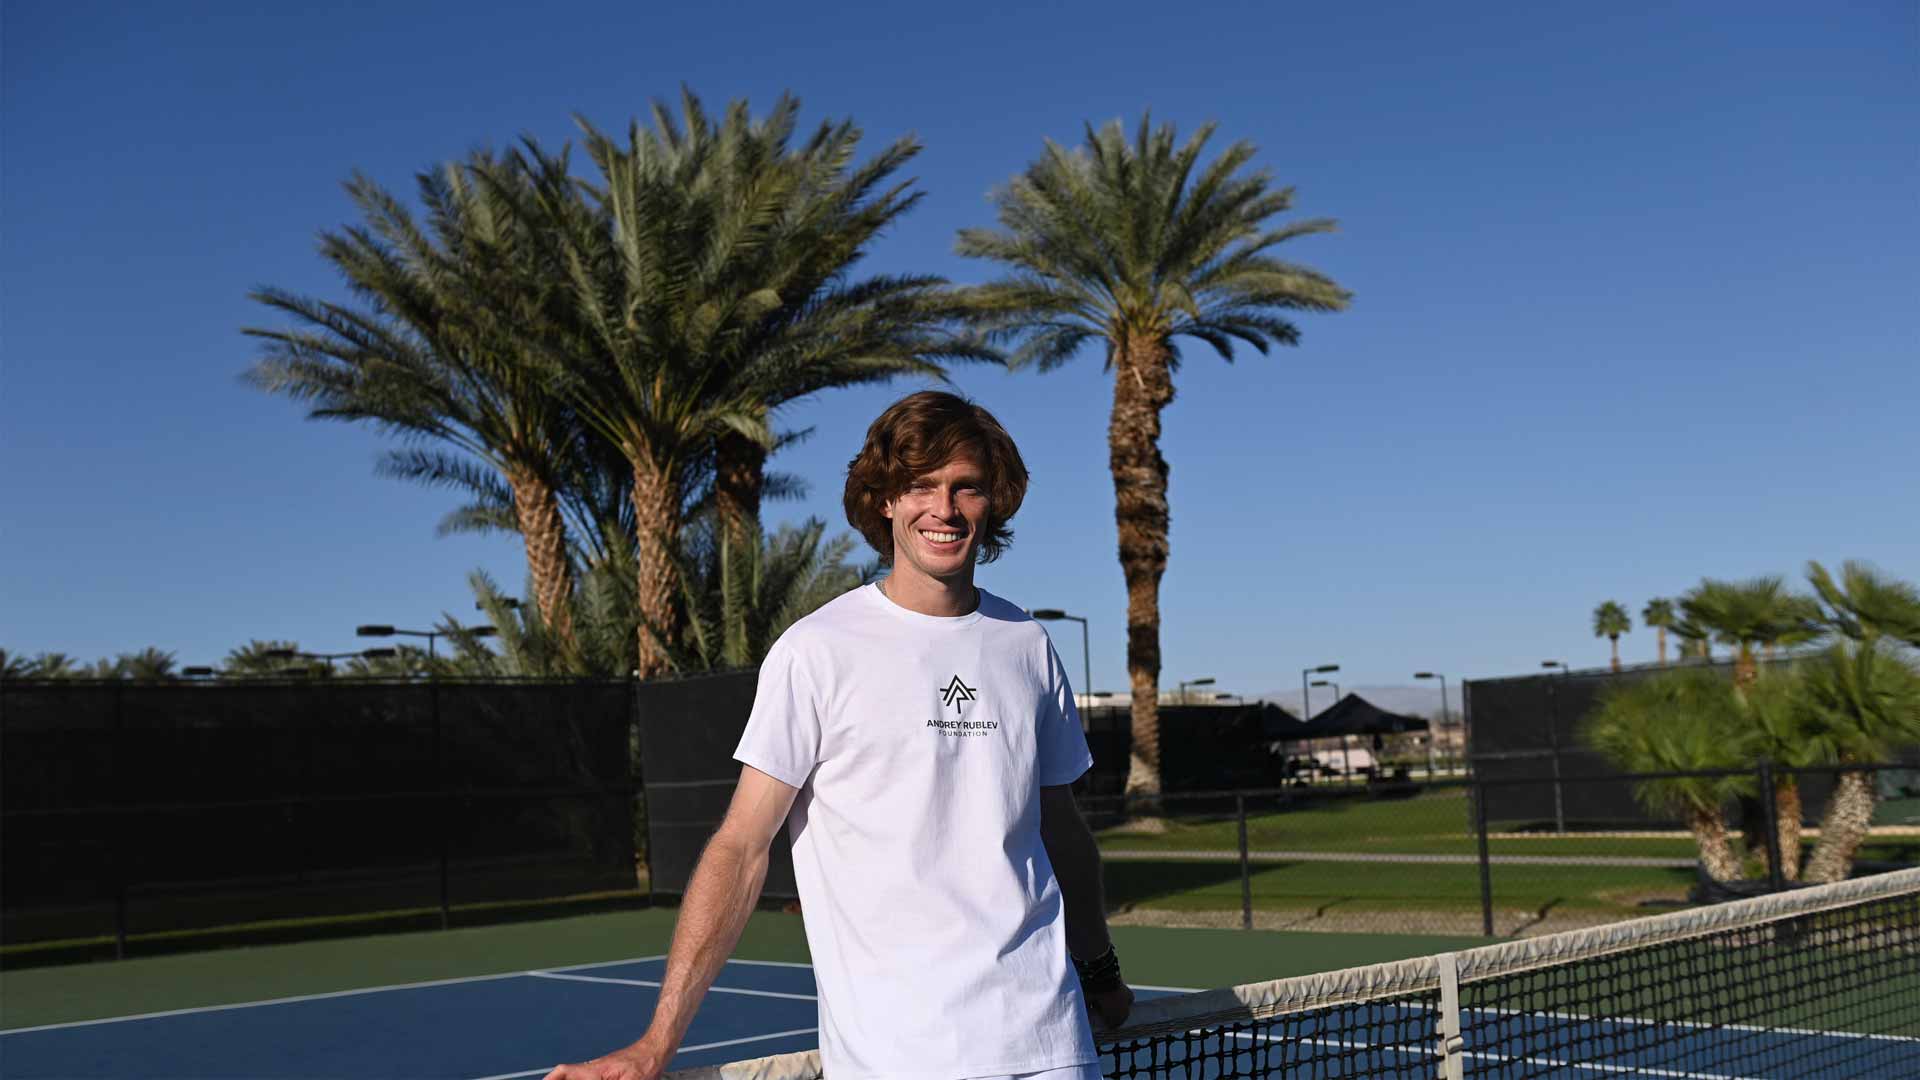 Rublev launches foundation to support kids in need